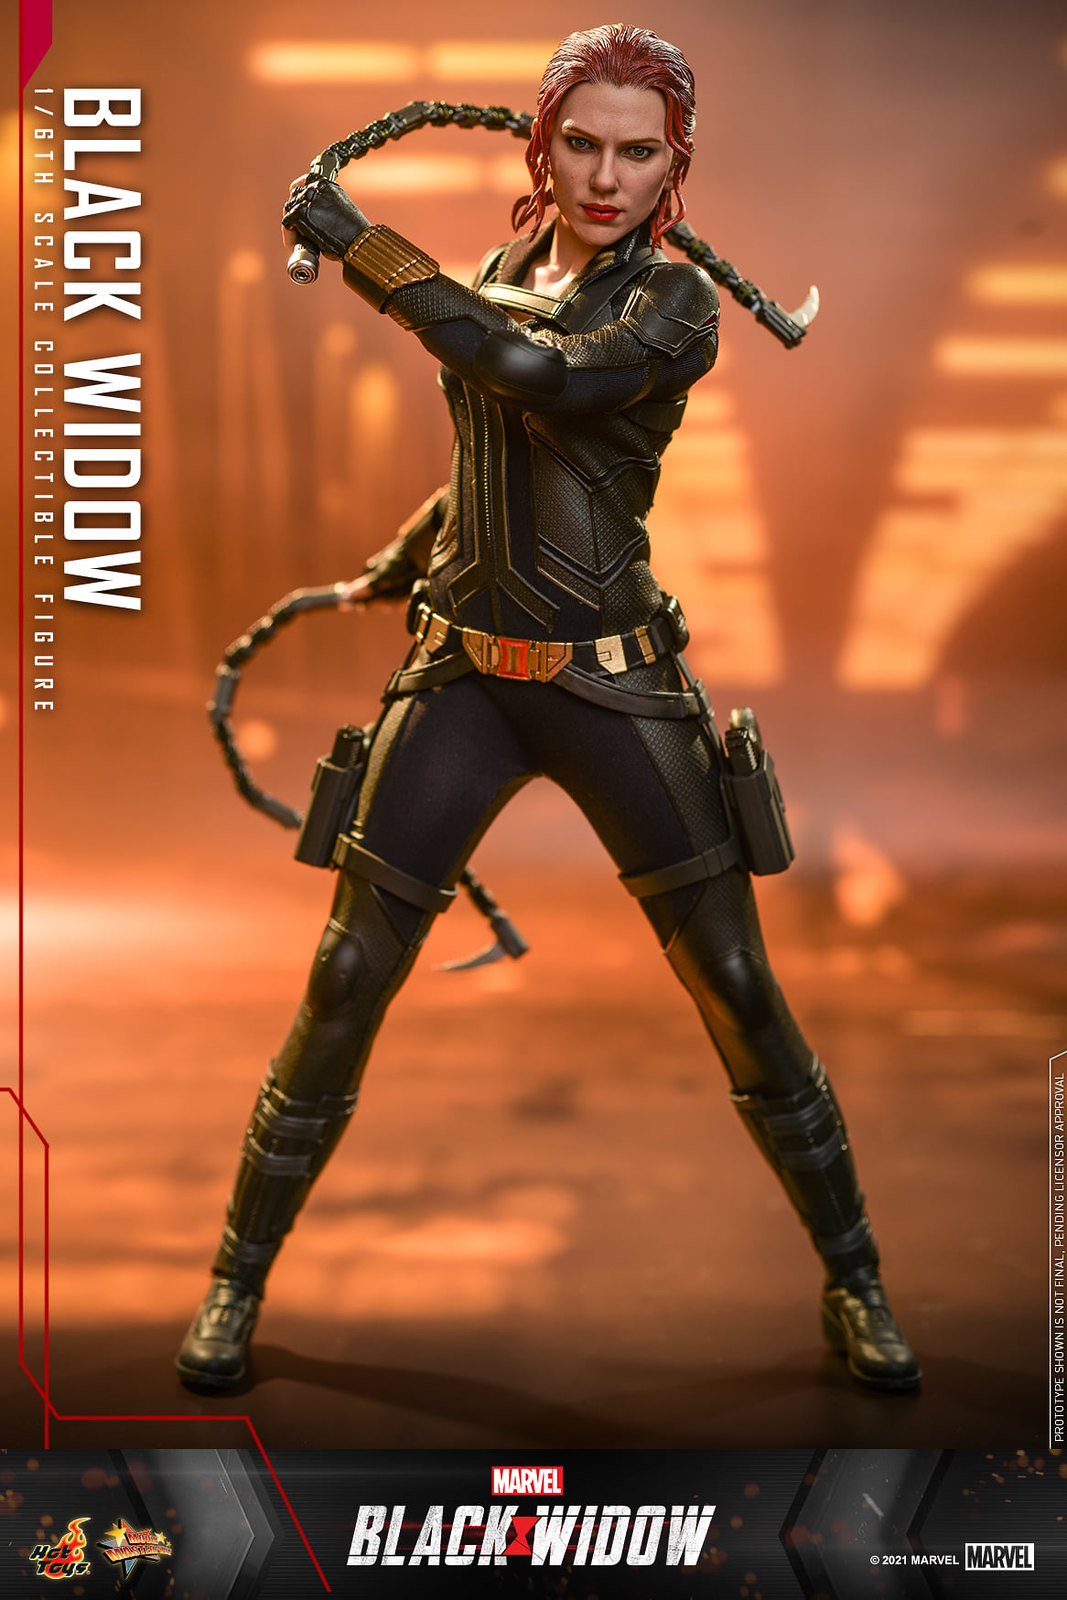 NEW PRODUCT: Hot Toys Black Widow - 1/6th scale Black Widow Collectible Figure 51312000519_ac68a6423e_h